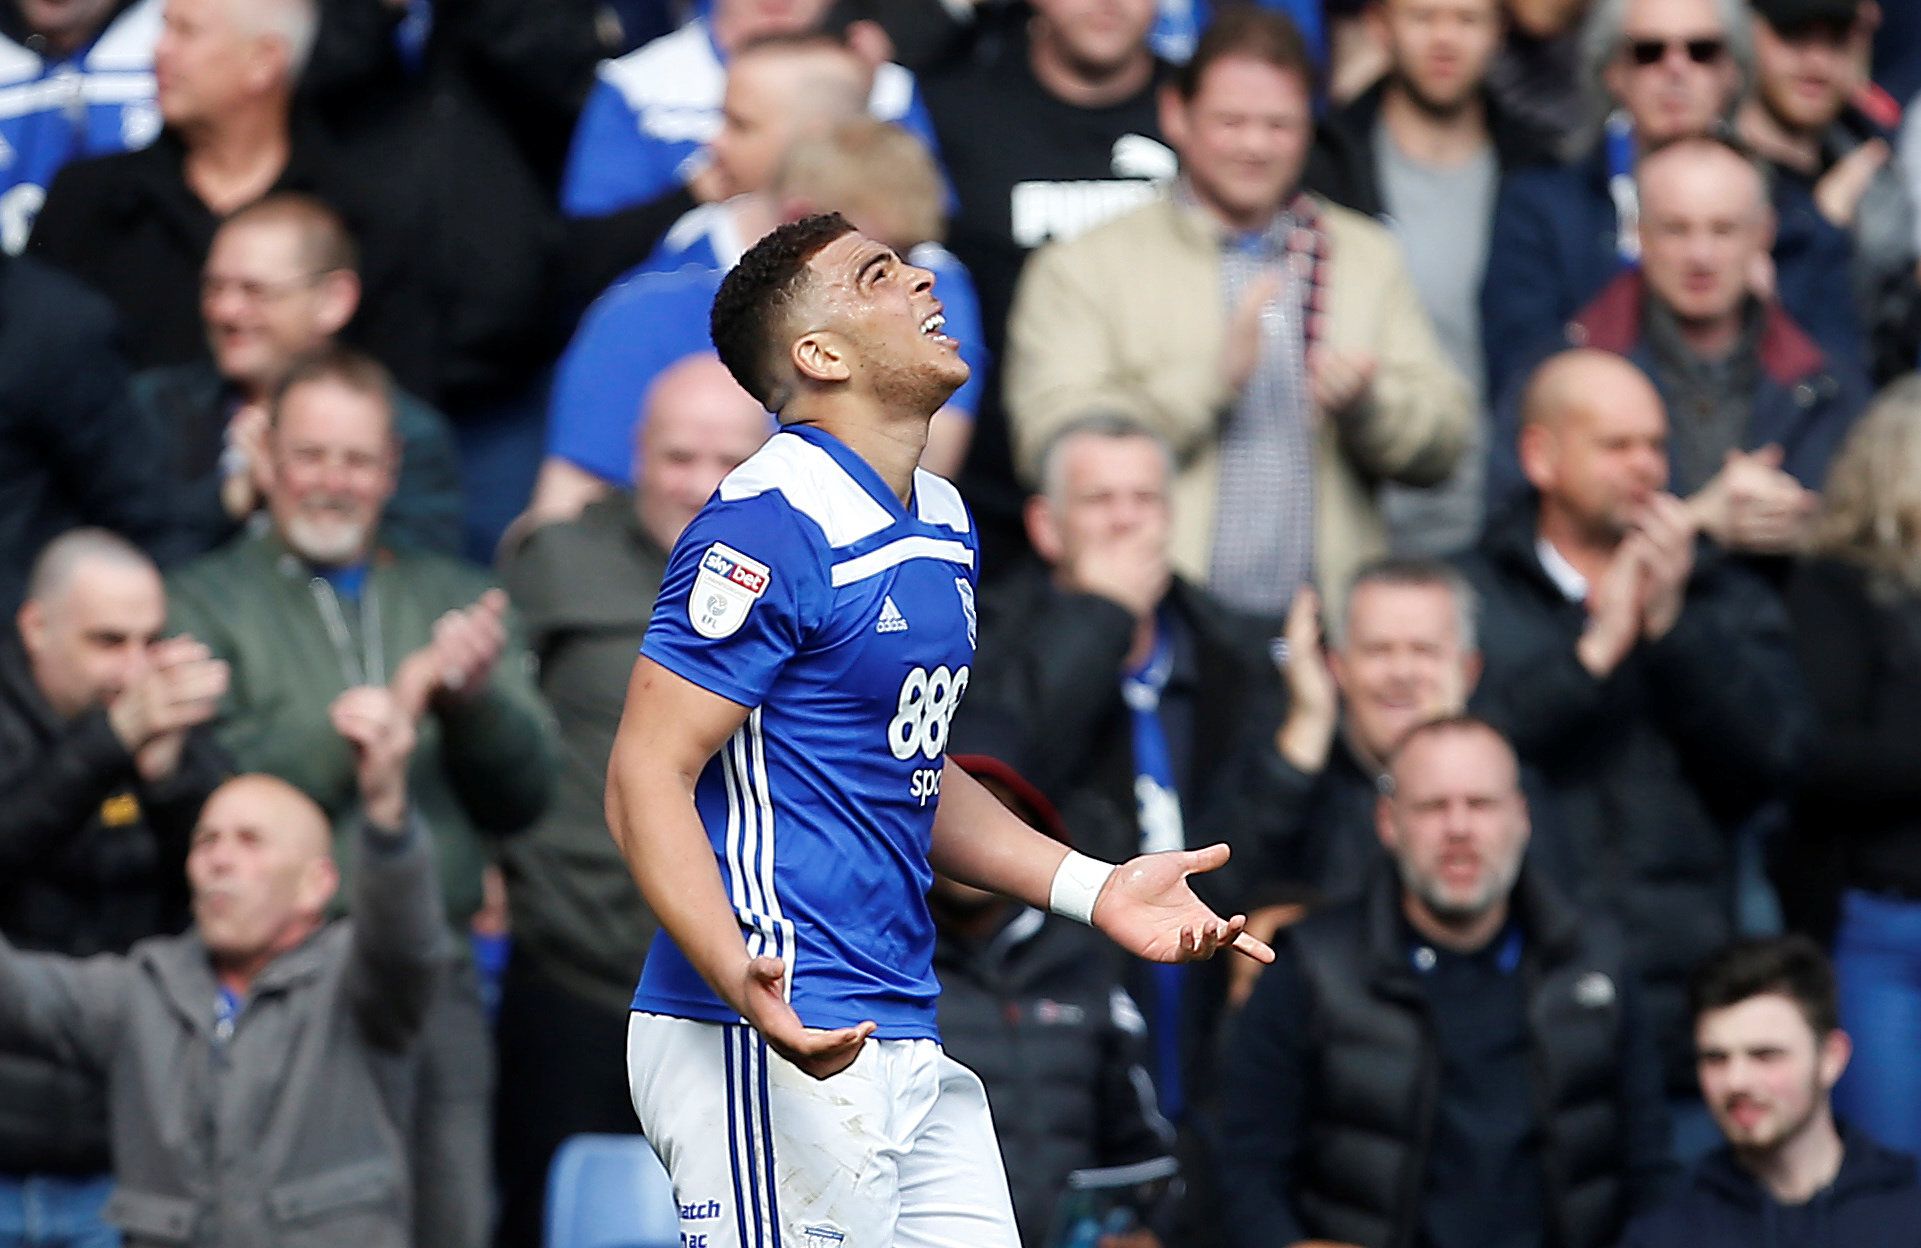 Soccer Football - Championship - Birmingham City v Leeds United - St Andrew's, Birmingham, Britain - April 6, 2019   Birmingham City's Che Adams celebrates scoring their first goal   Action Images/Craig Brough    EDITORIAL USE ONLY. No use with unauthorized audio, video, data, fixture lists, club/league logos or 